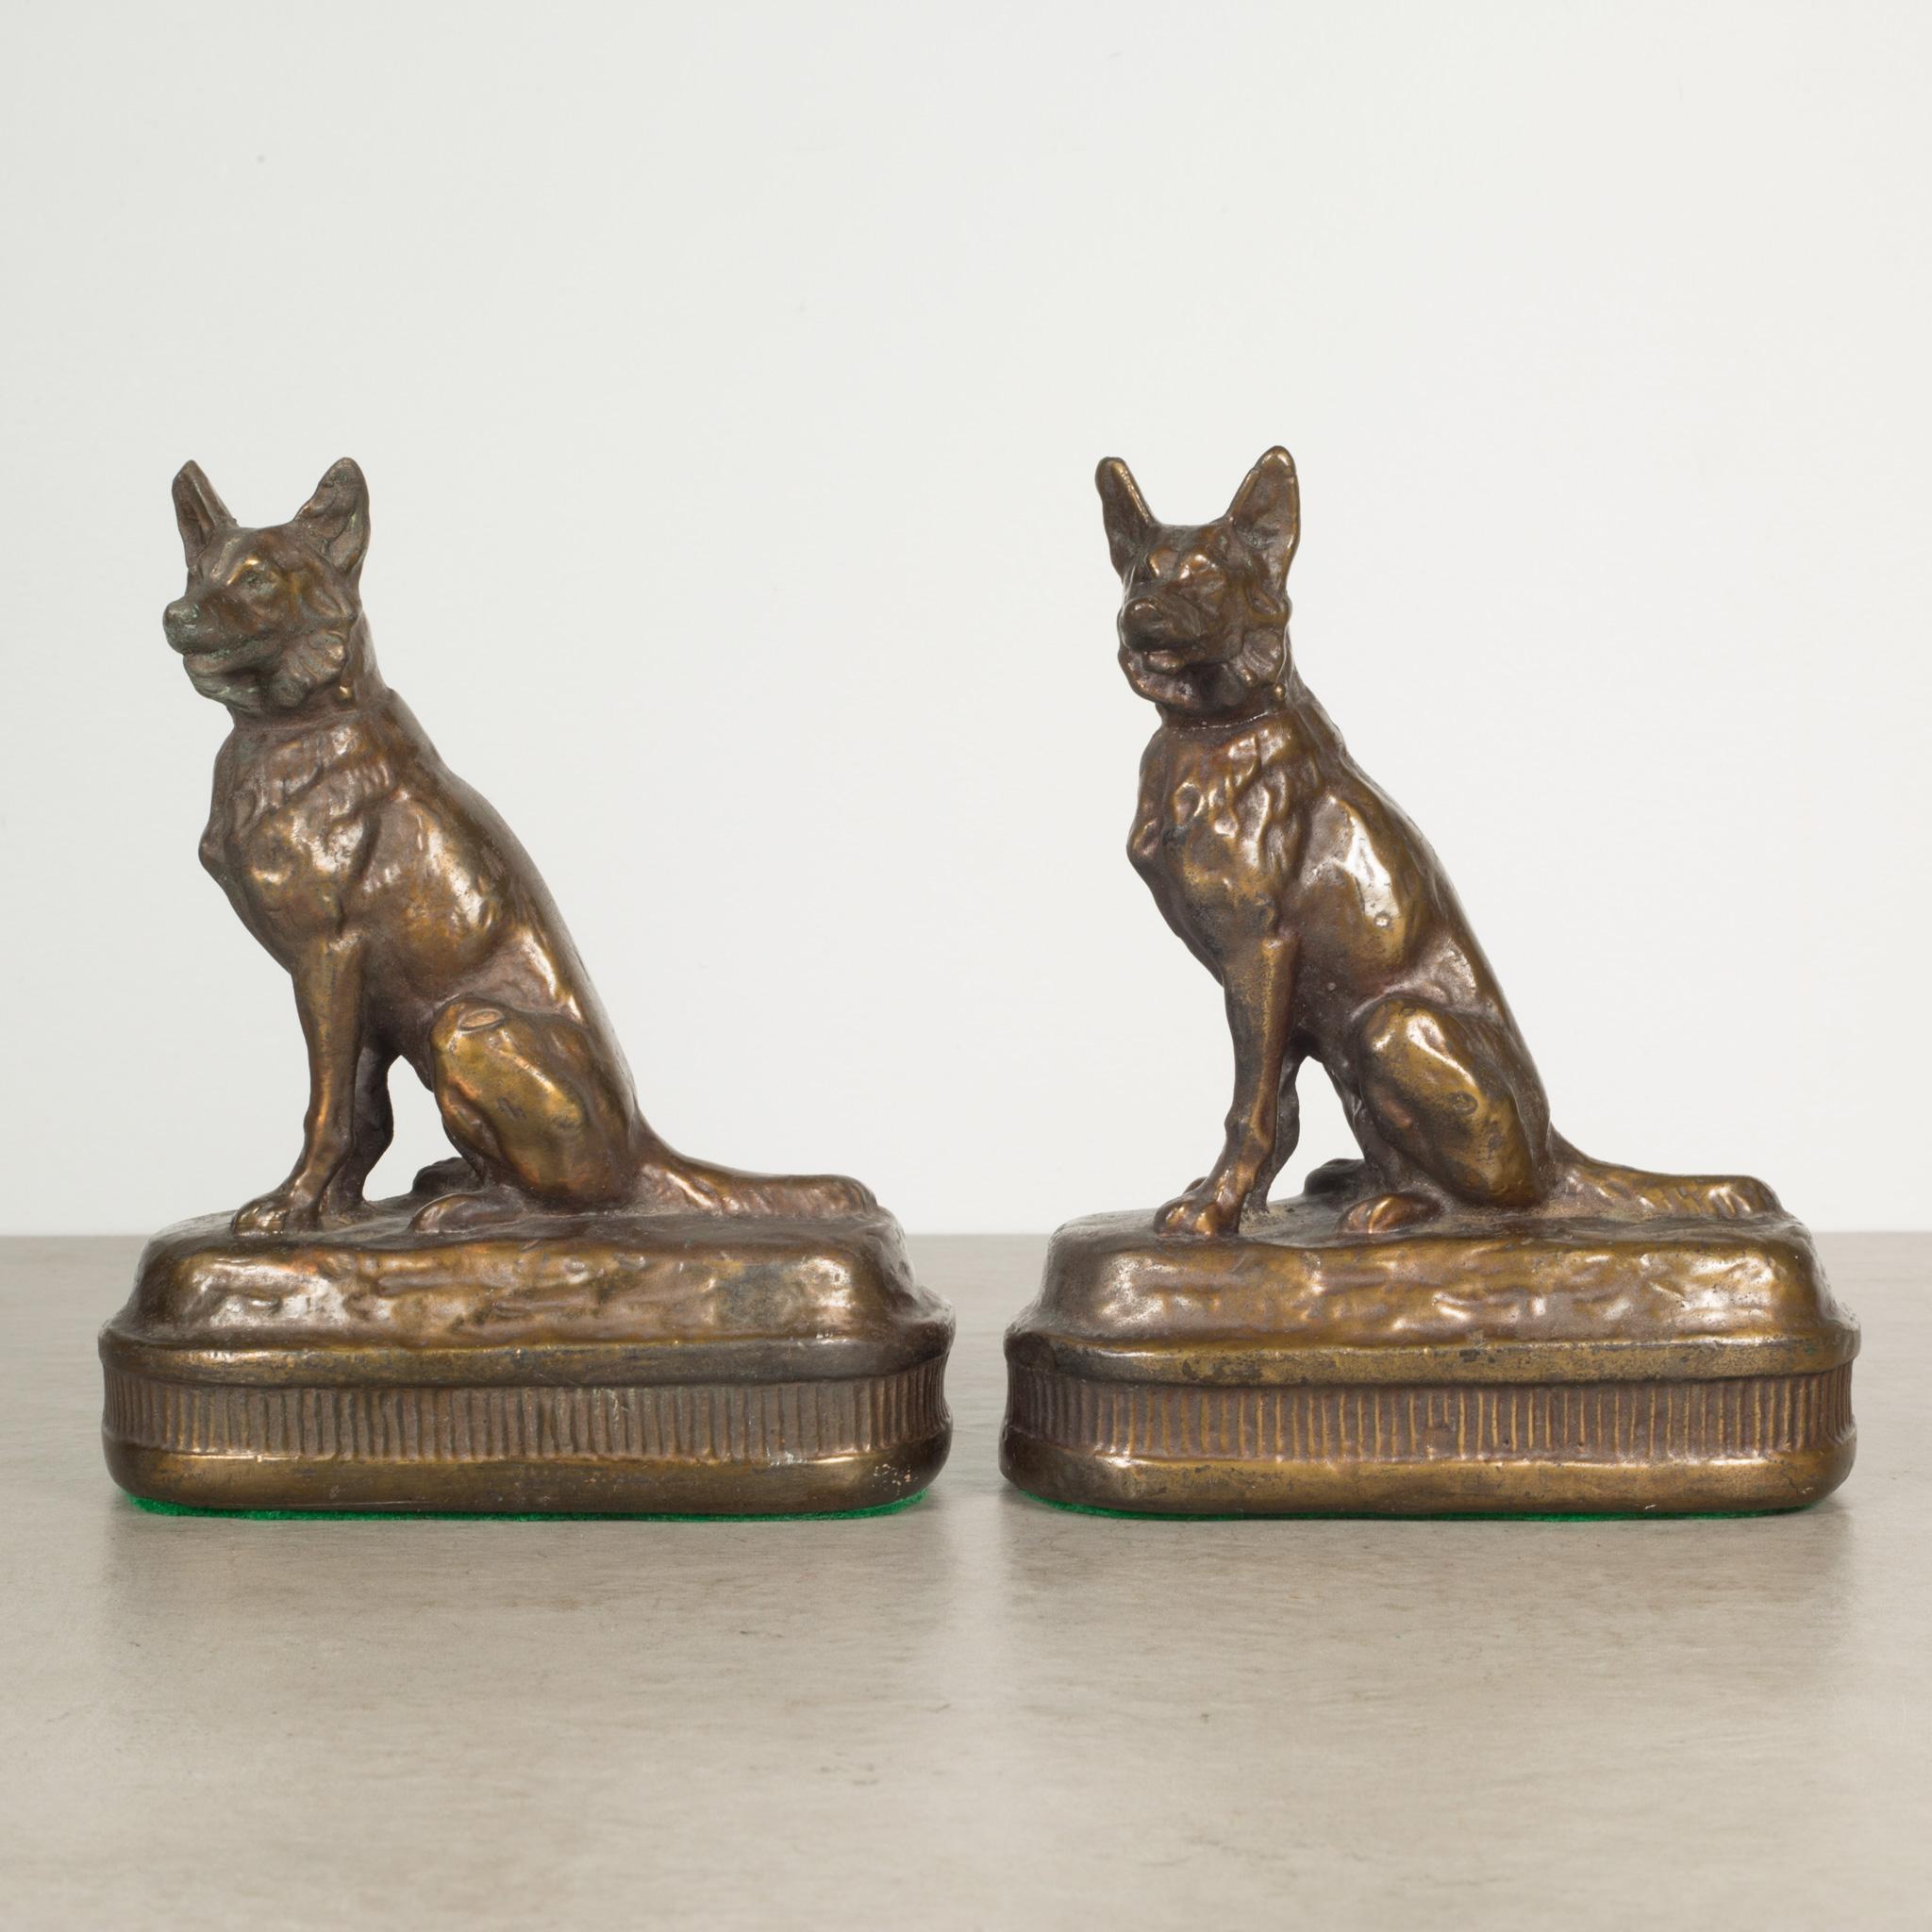 ABOUT

This is an original pair of Art Deco cast bronze German Shepherd bookends manufactured by Armor Bronze Company, New York USA. Both pieces have retained their original bronze finish and are in excellent condition with appropriate patina for